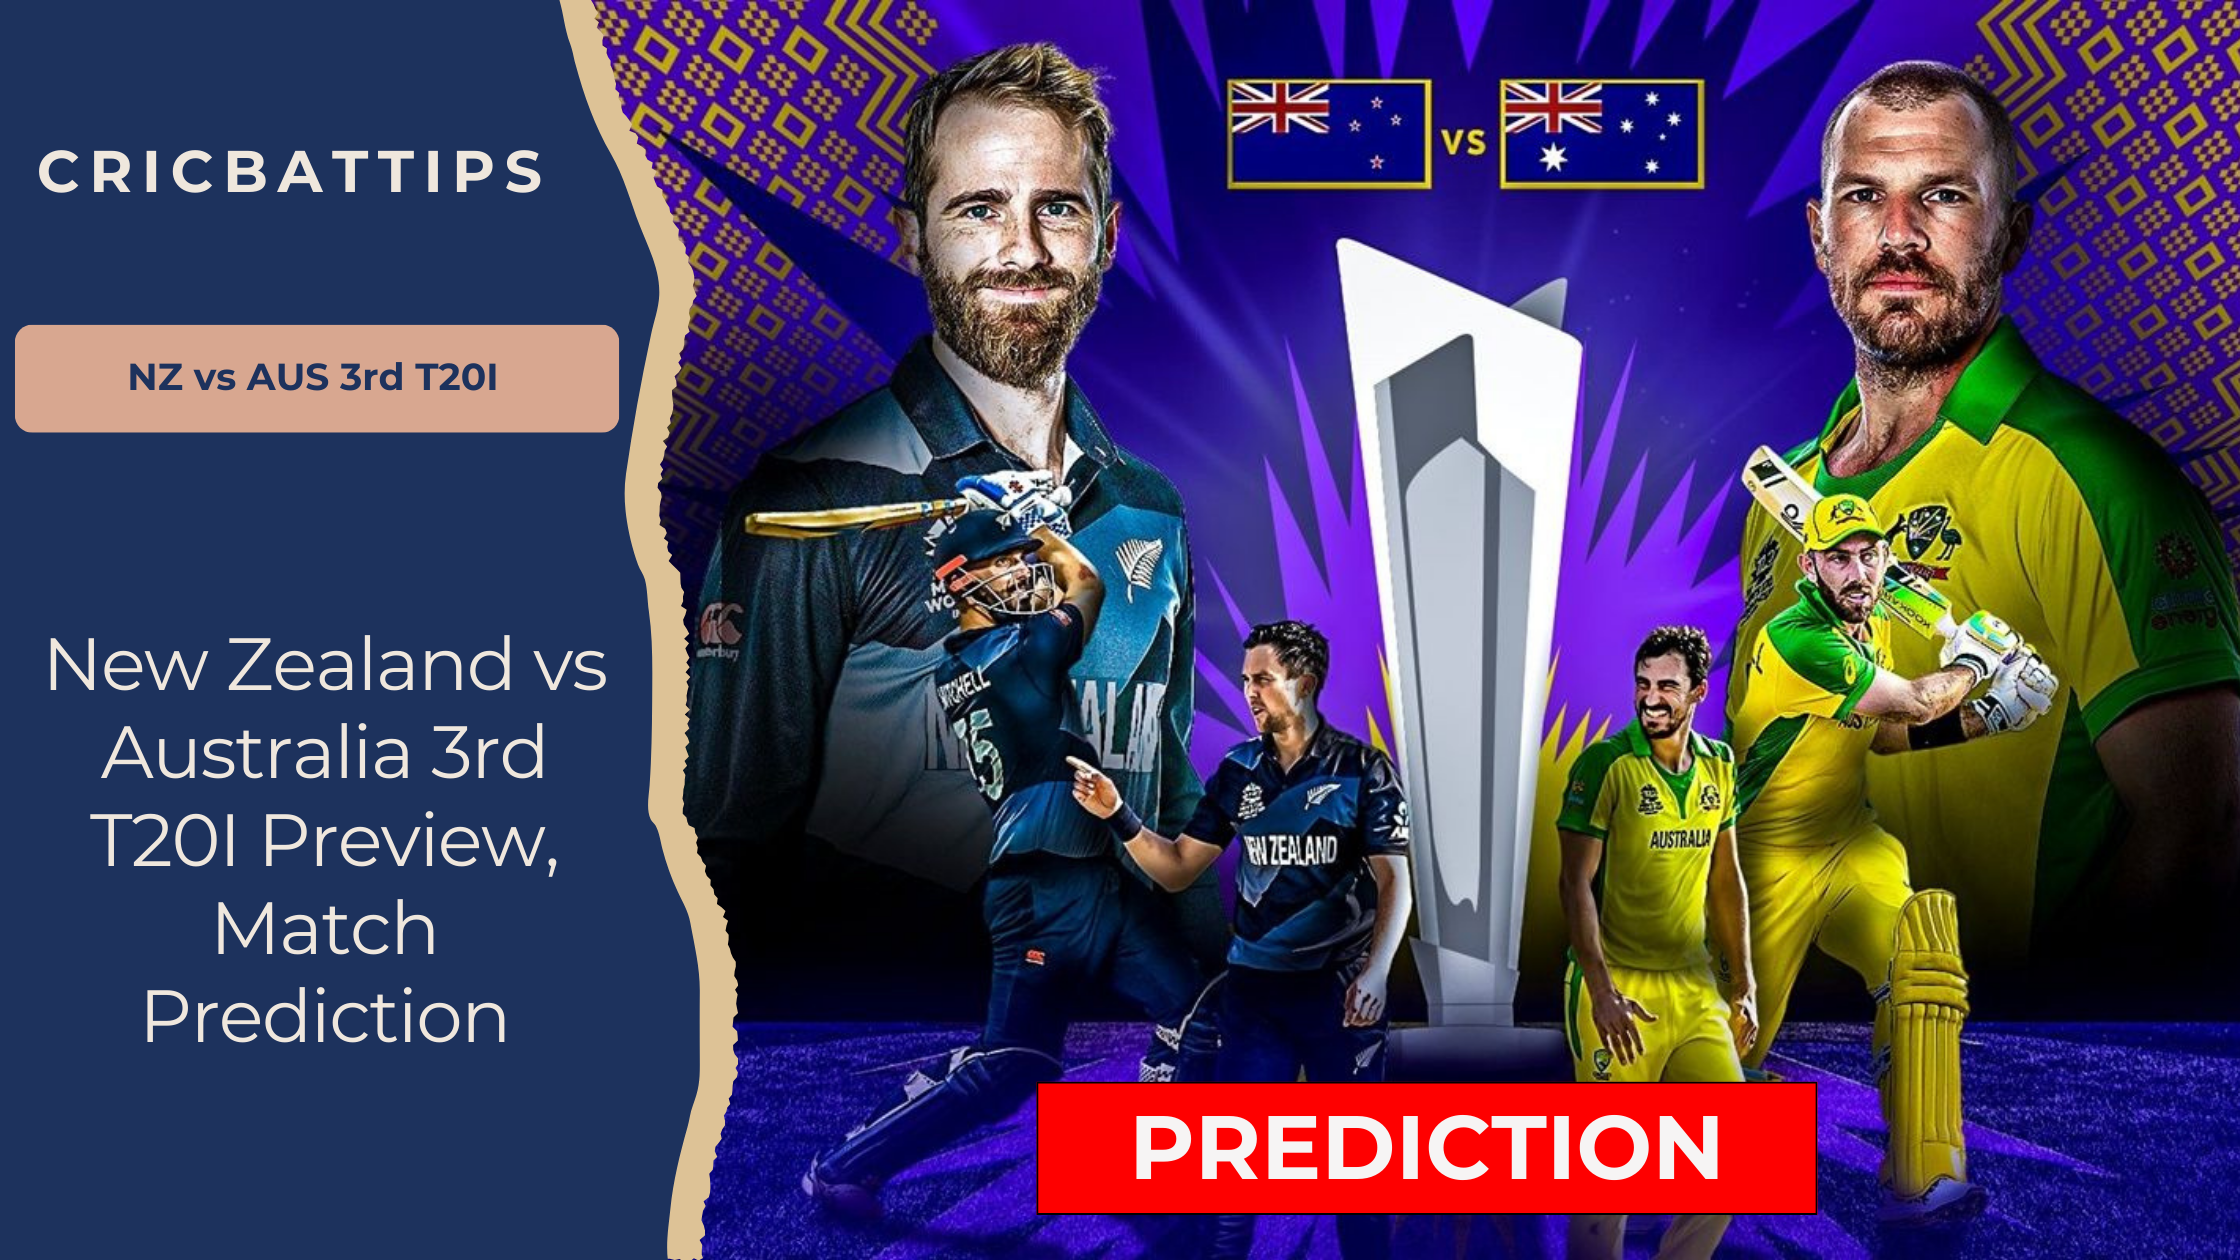 New Zealand vs Australia 3rd T20I Preview, Prediction and Match Analysis